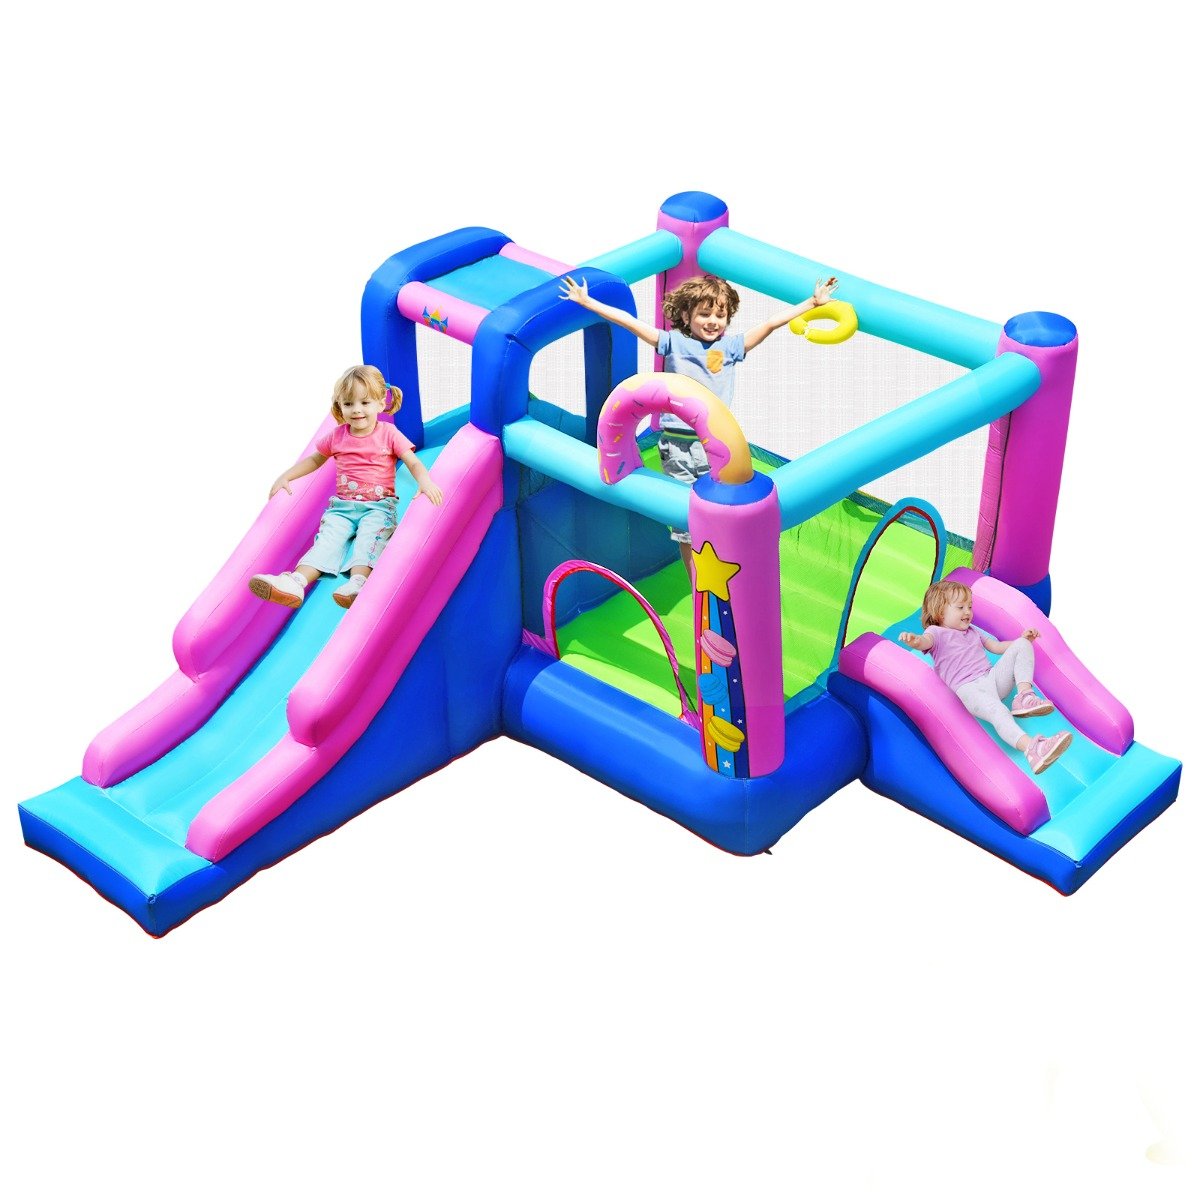 Adventure Awaits: Inflatable Bounce House with 2 Slides for Kids (Blower Included)